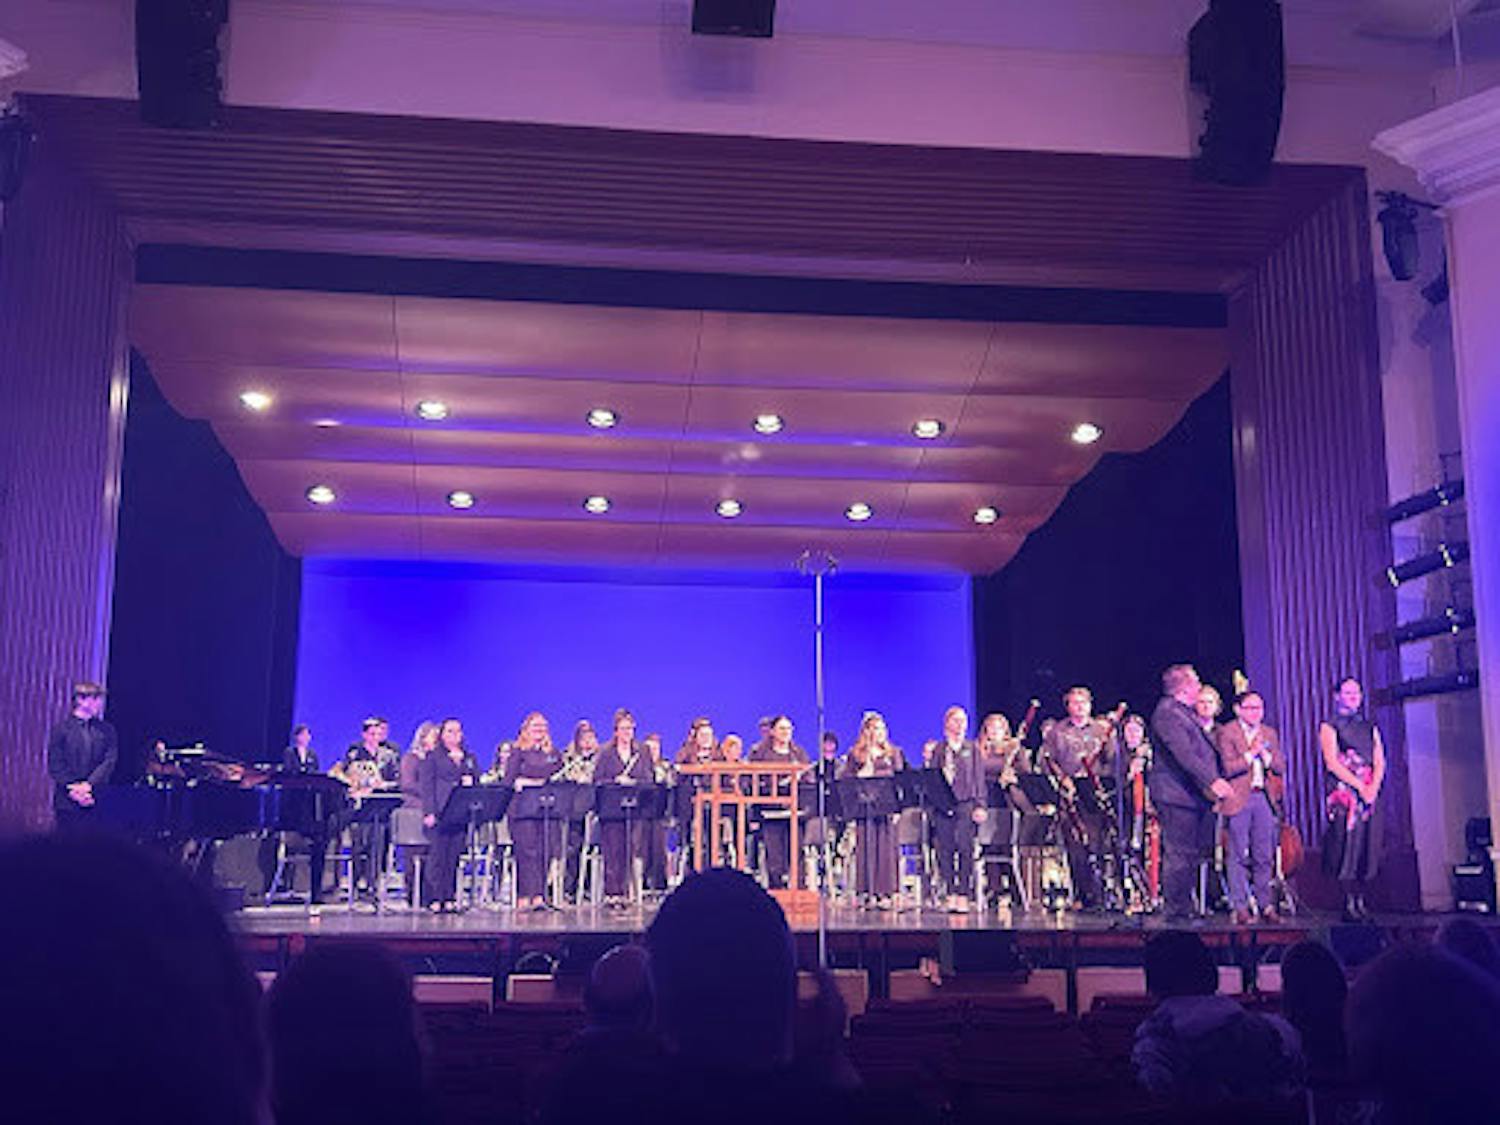 The April 27 performance was held in Kendall Hall and consisted of five pieces (Photo by Jenna Rittman / Correspondent).